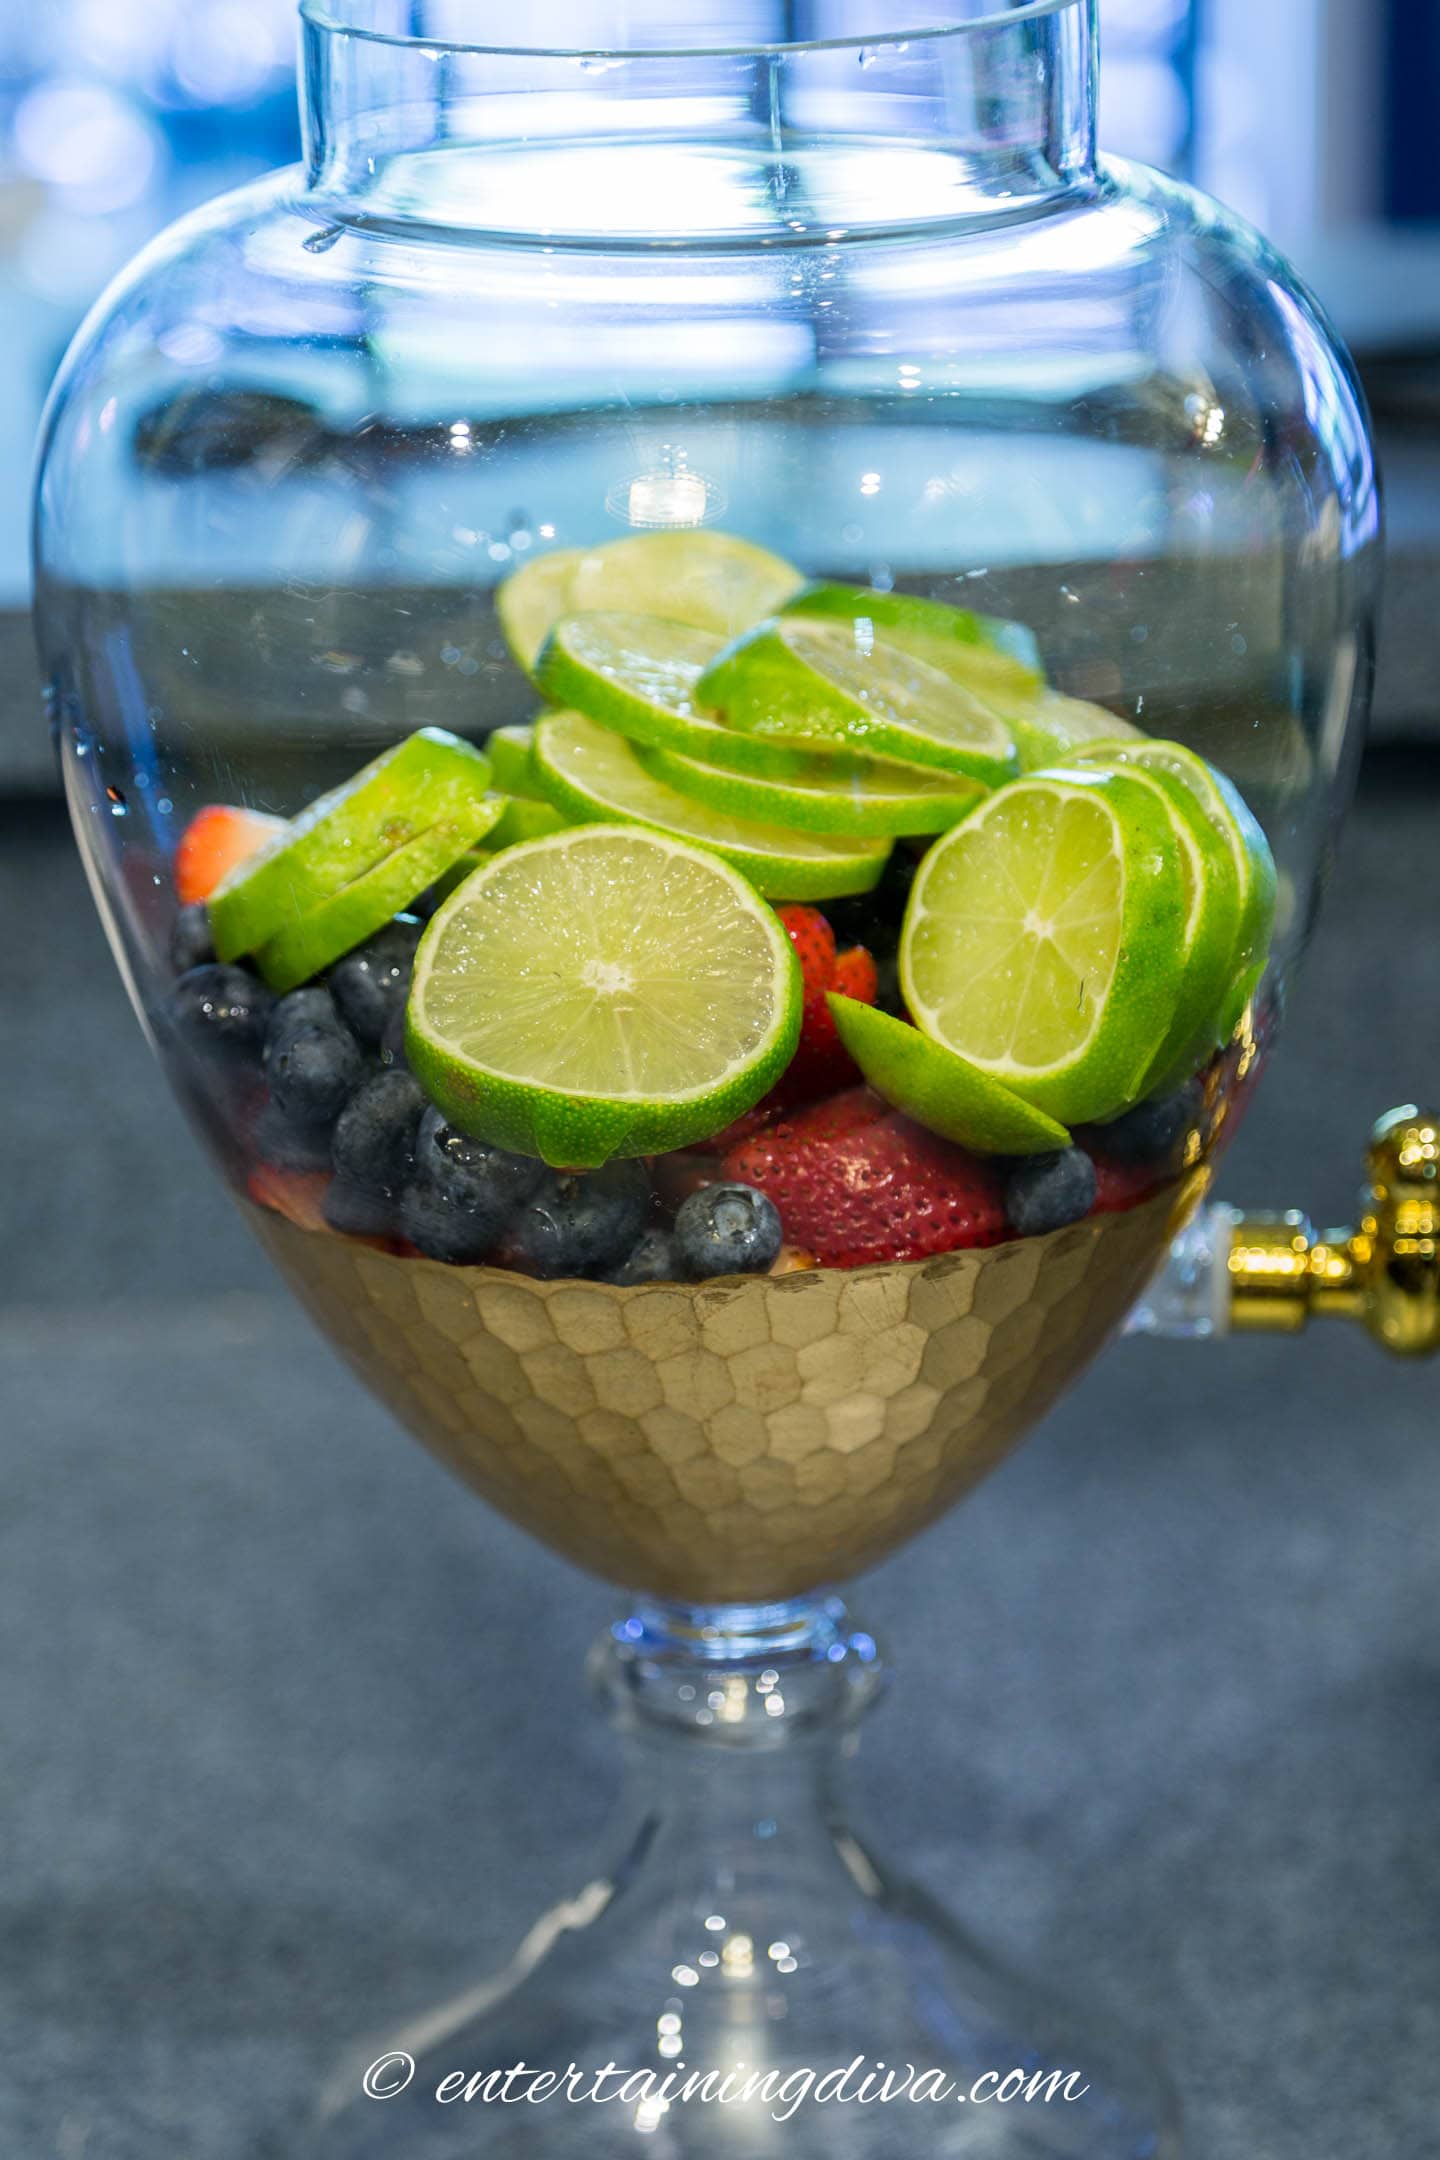 berries and limes in a drink dispenser